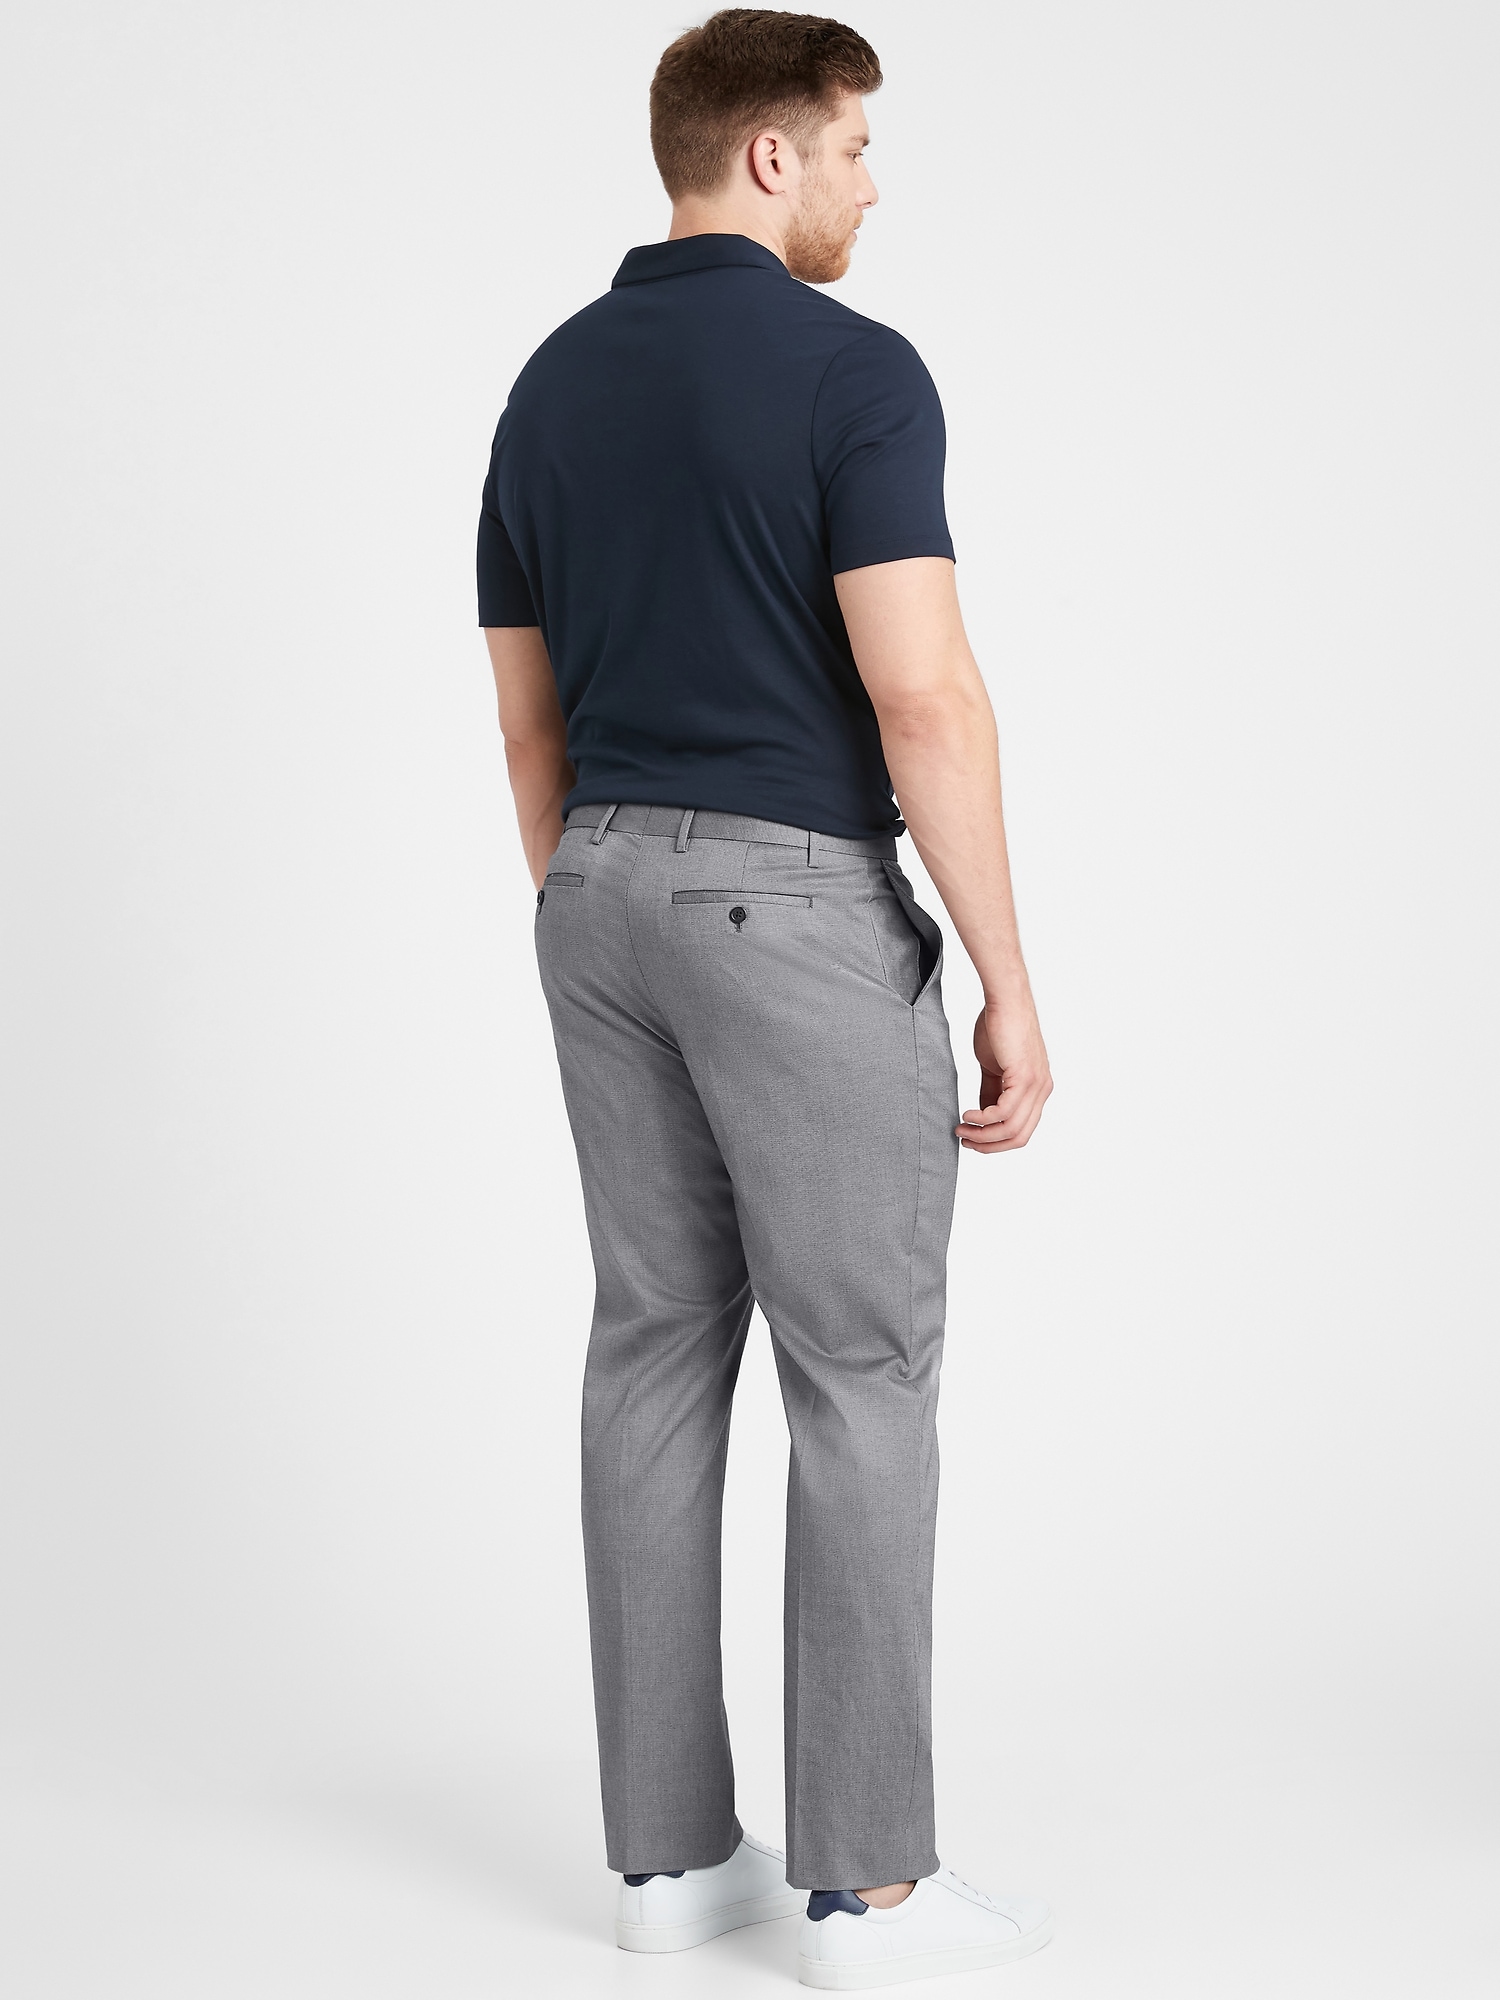 Buy Martin Fit Banana Republic Pants, Size 6 Stretch Pants, Striped Pants  Online in India - Etsy